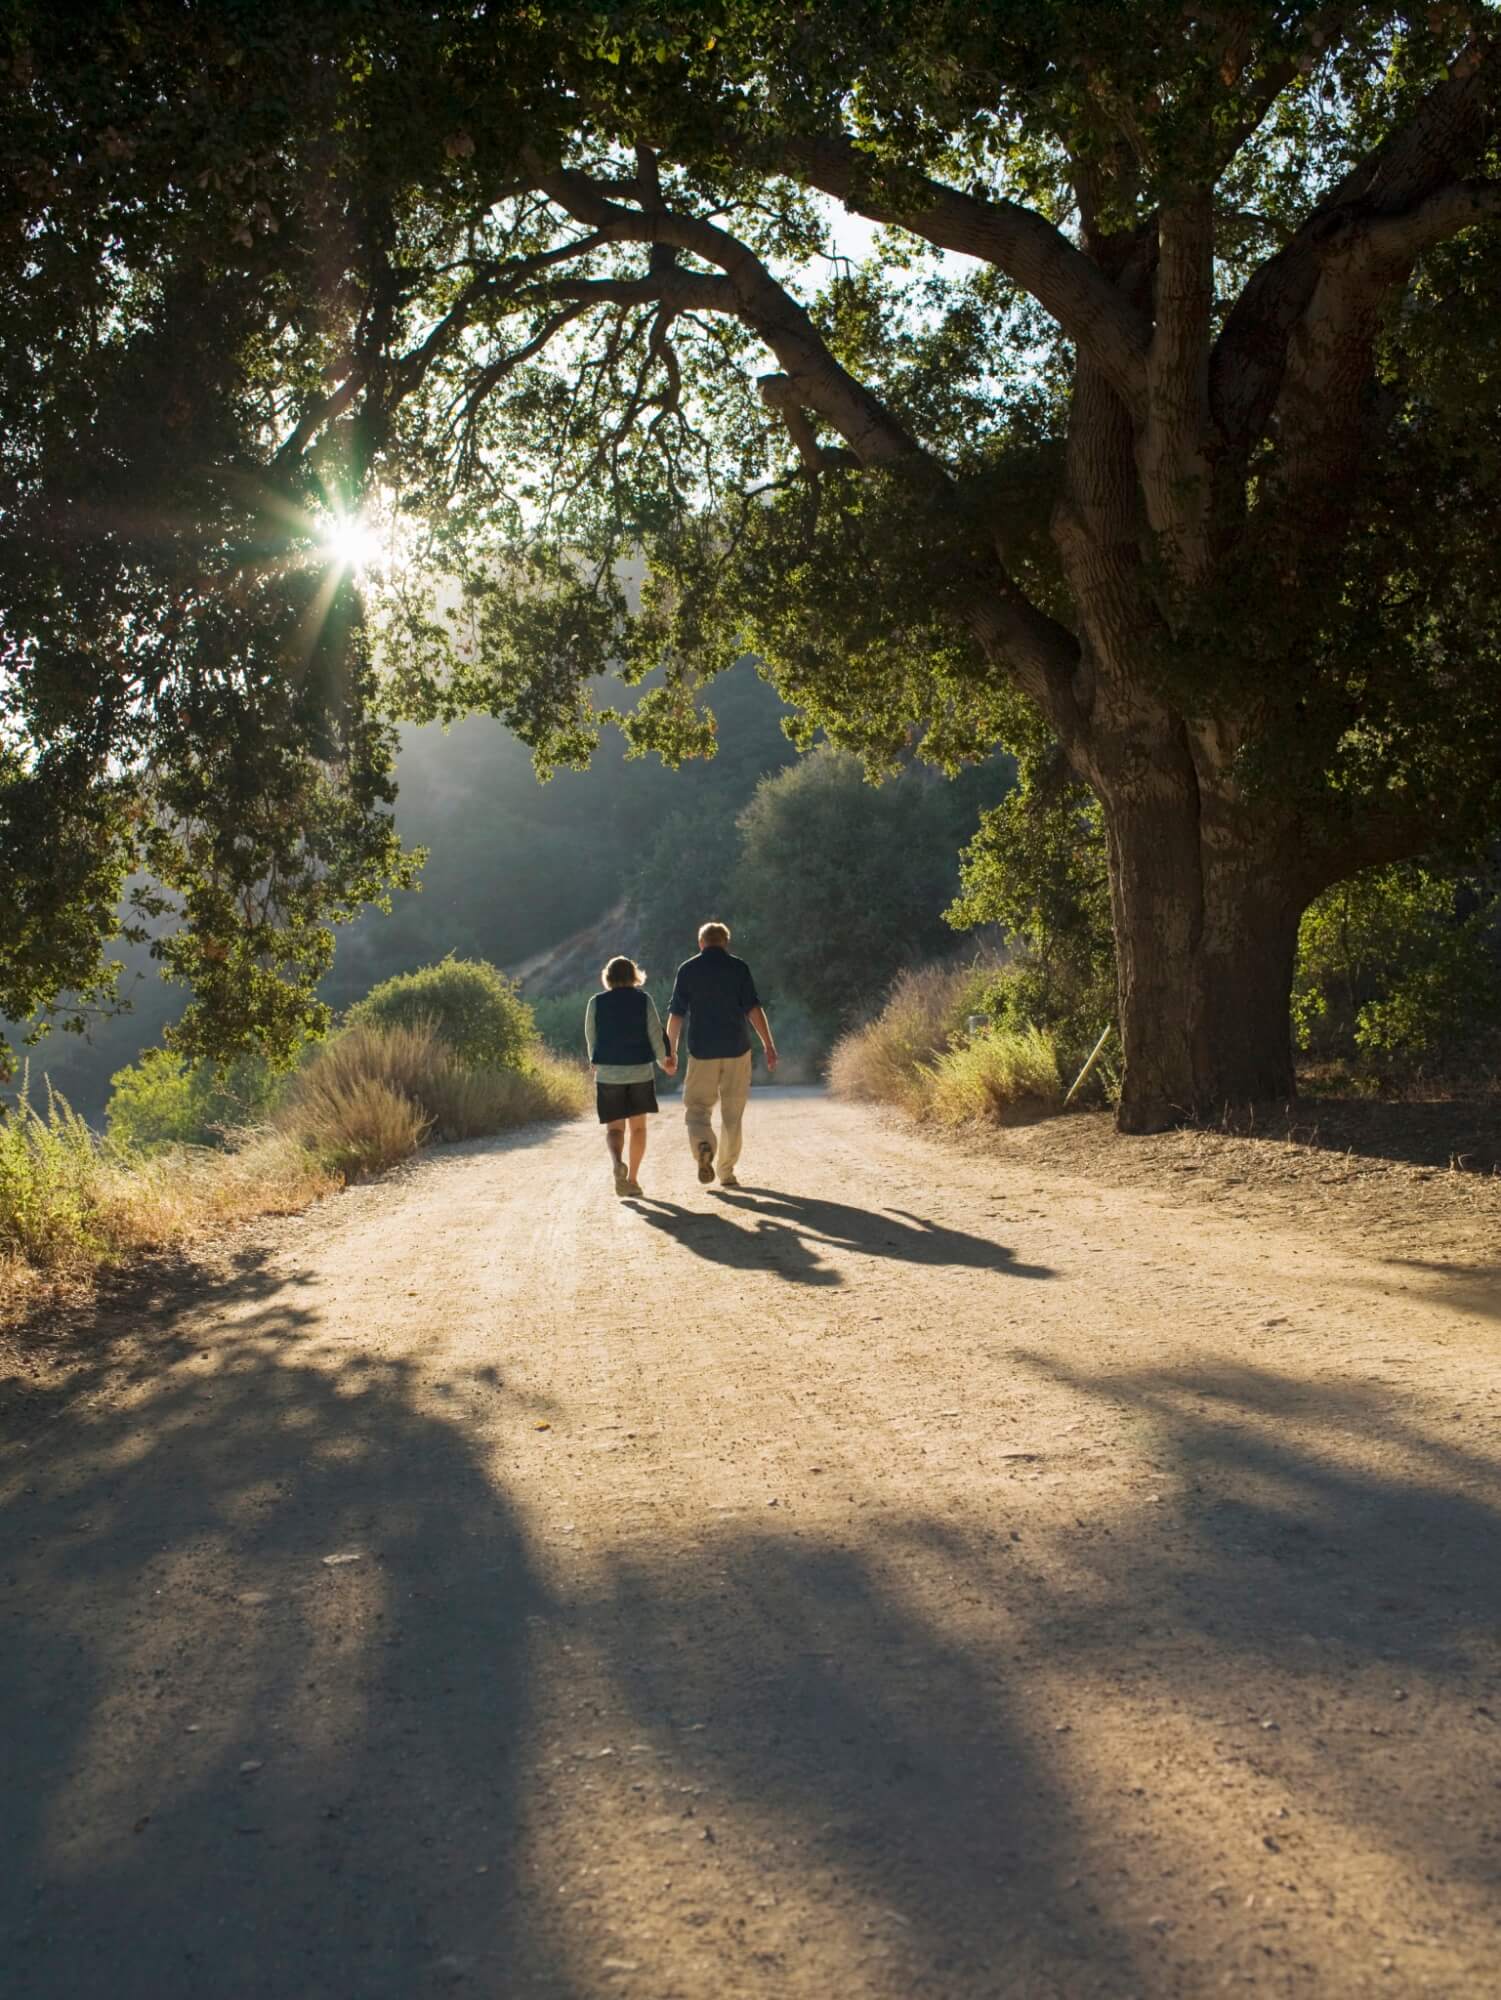 A couple out walking in nature